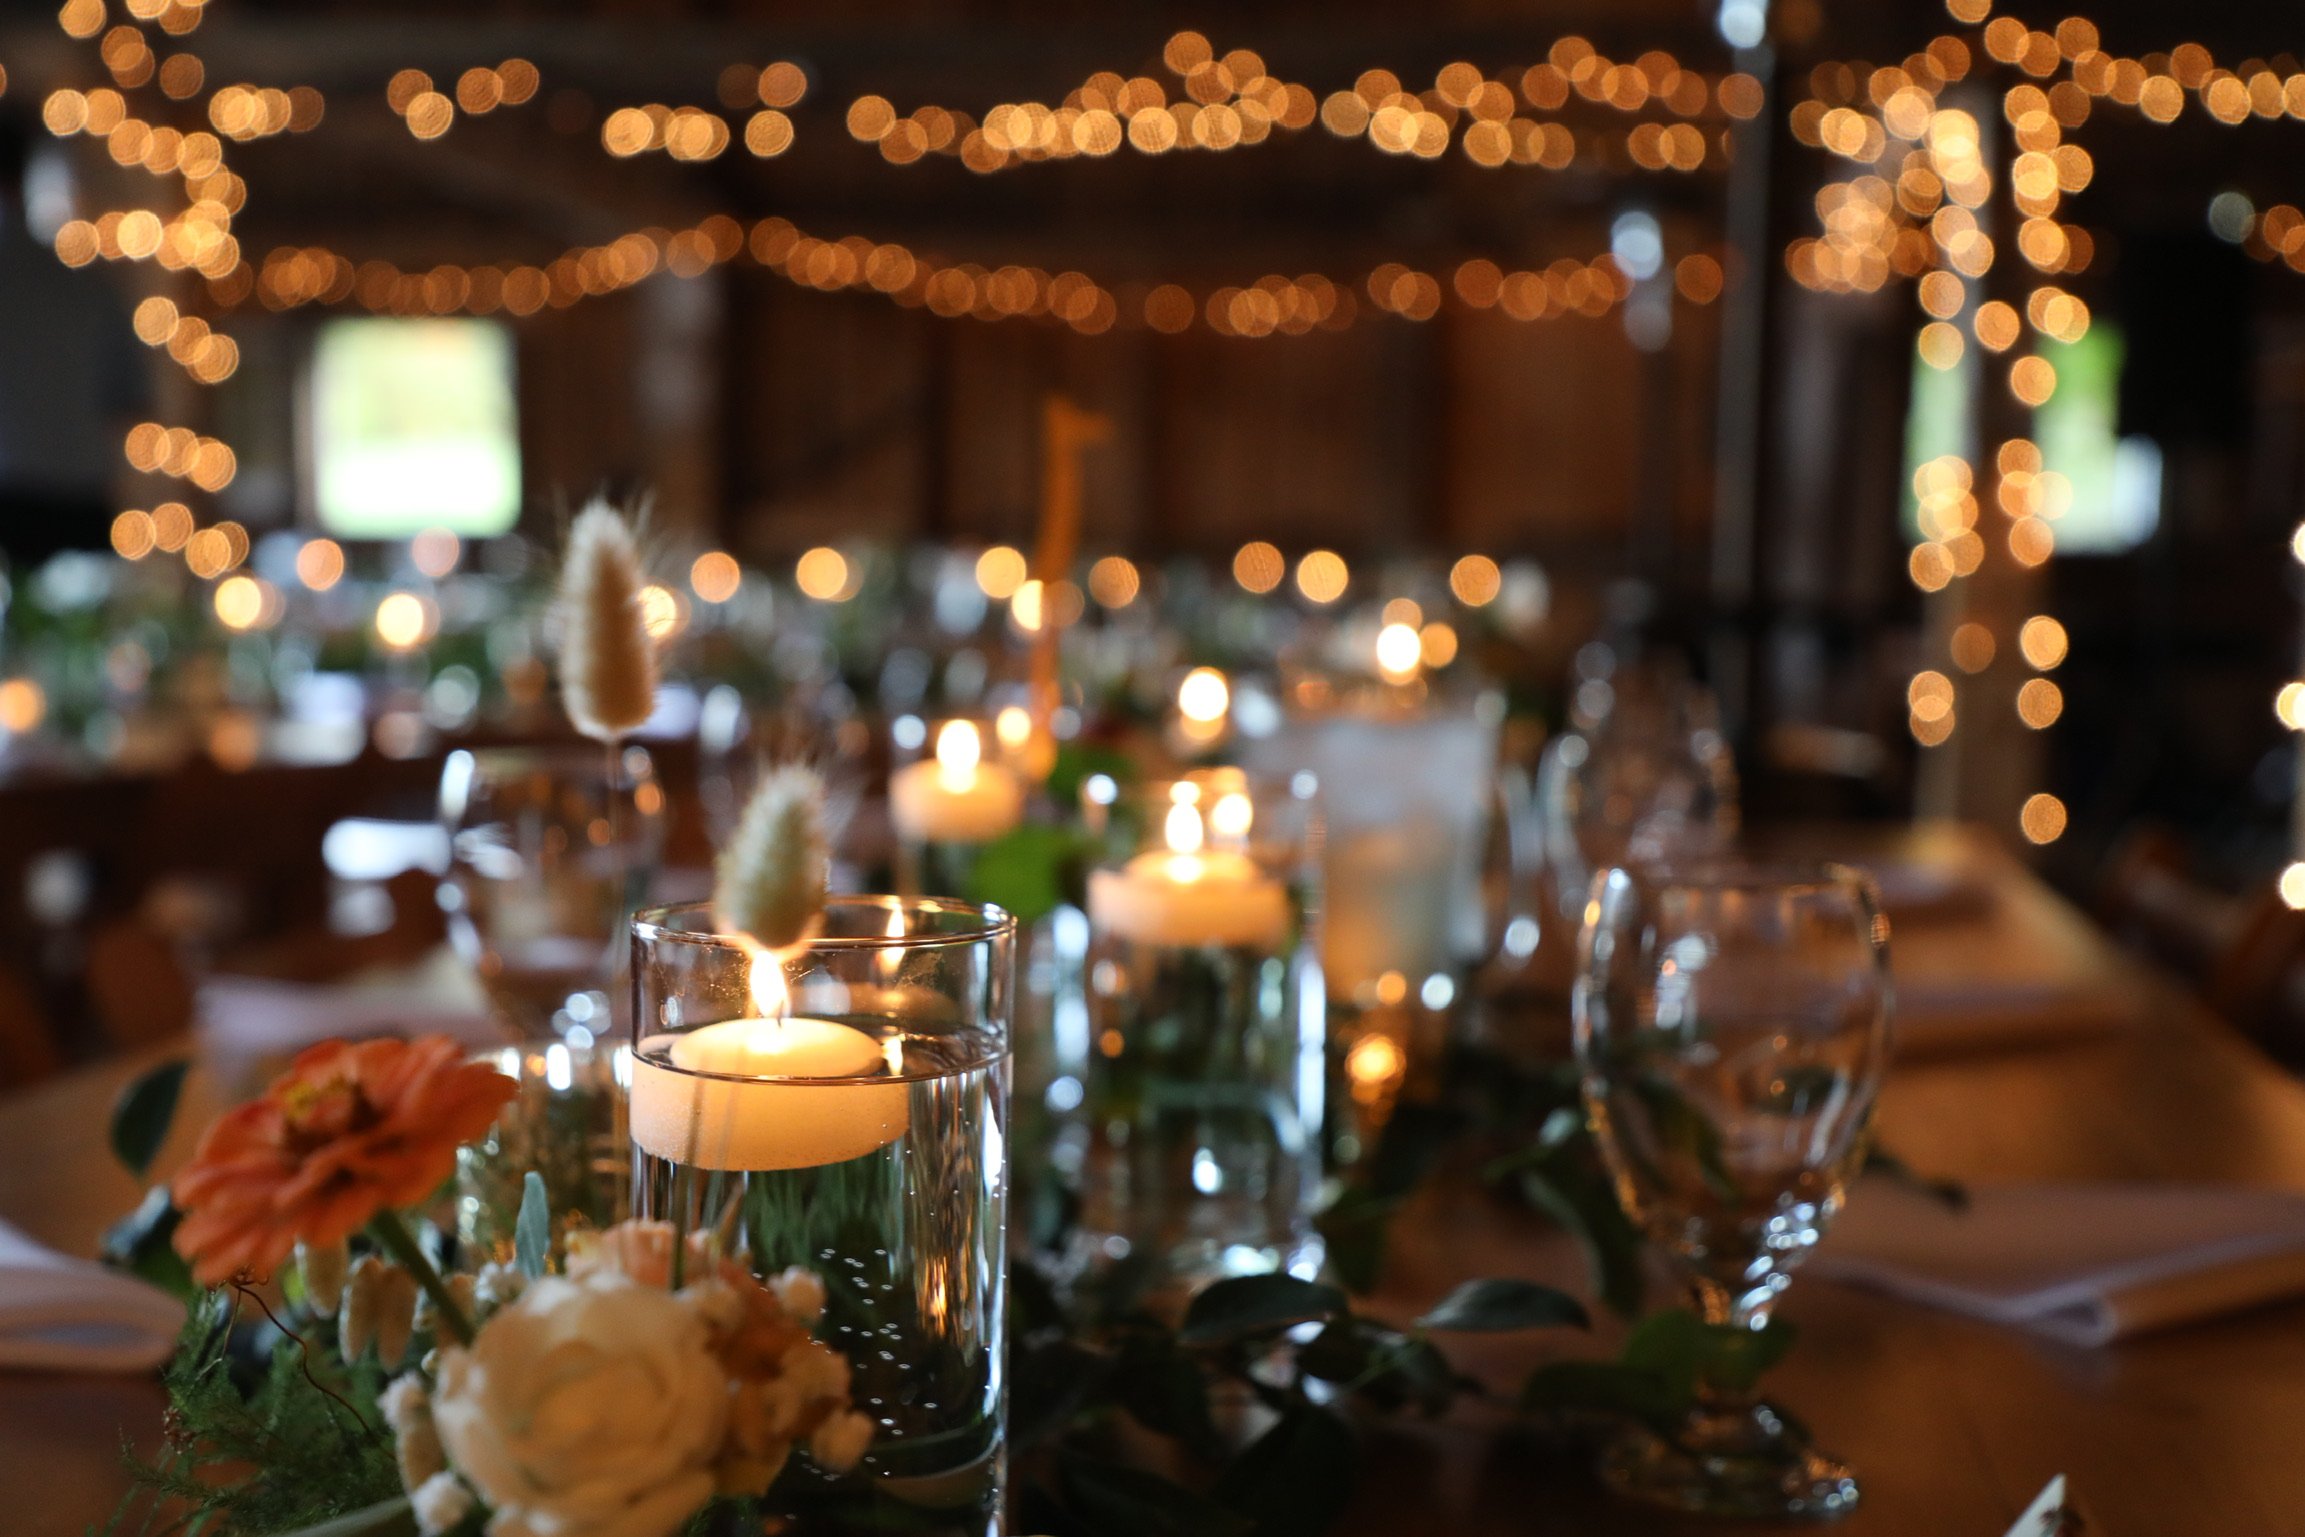 Dinner by candle light in the barn